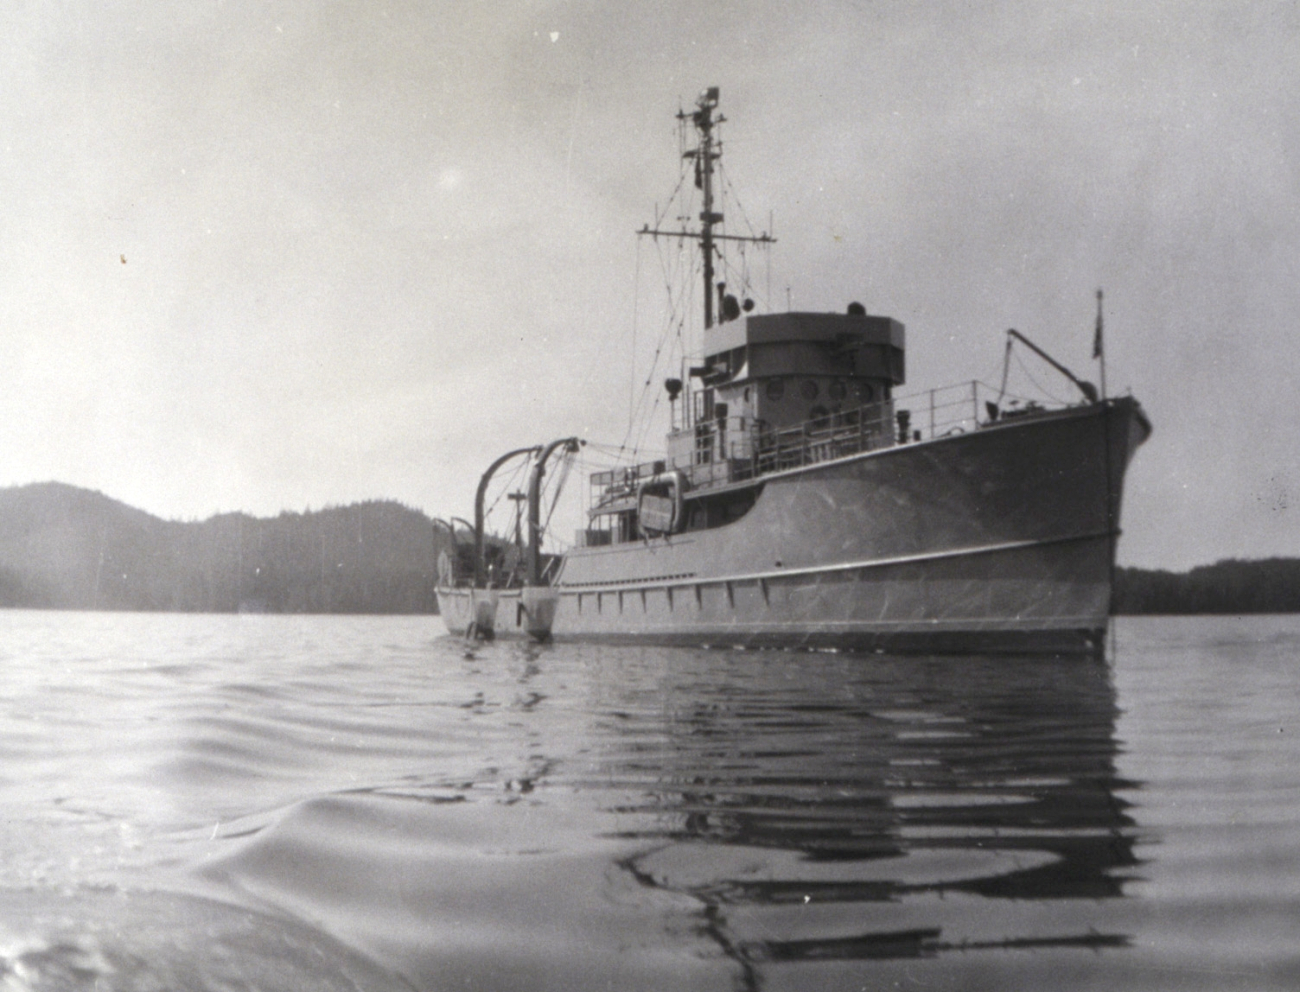 Coast and Geodetic Survey Ship BOWIE